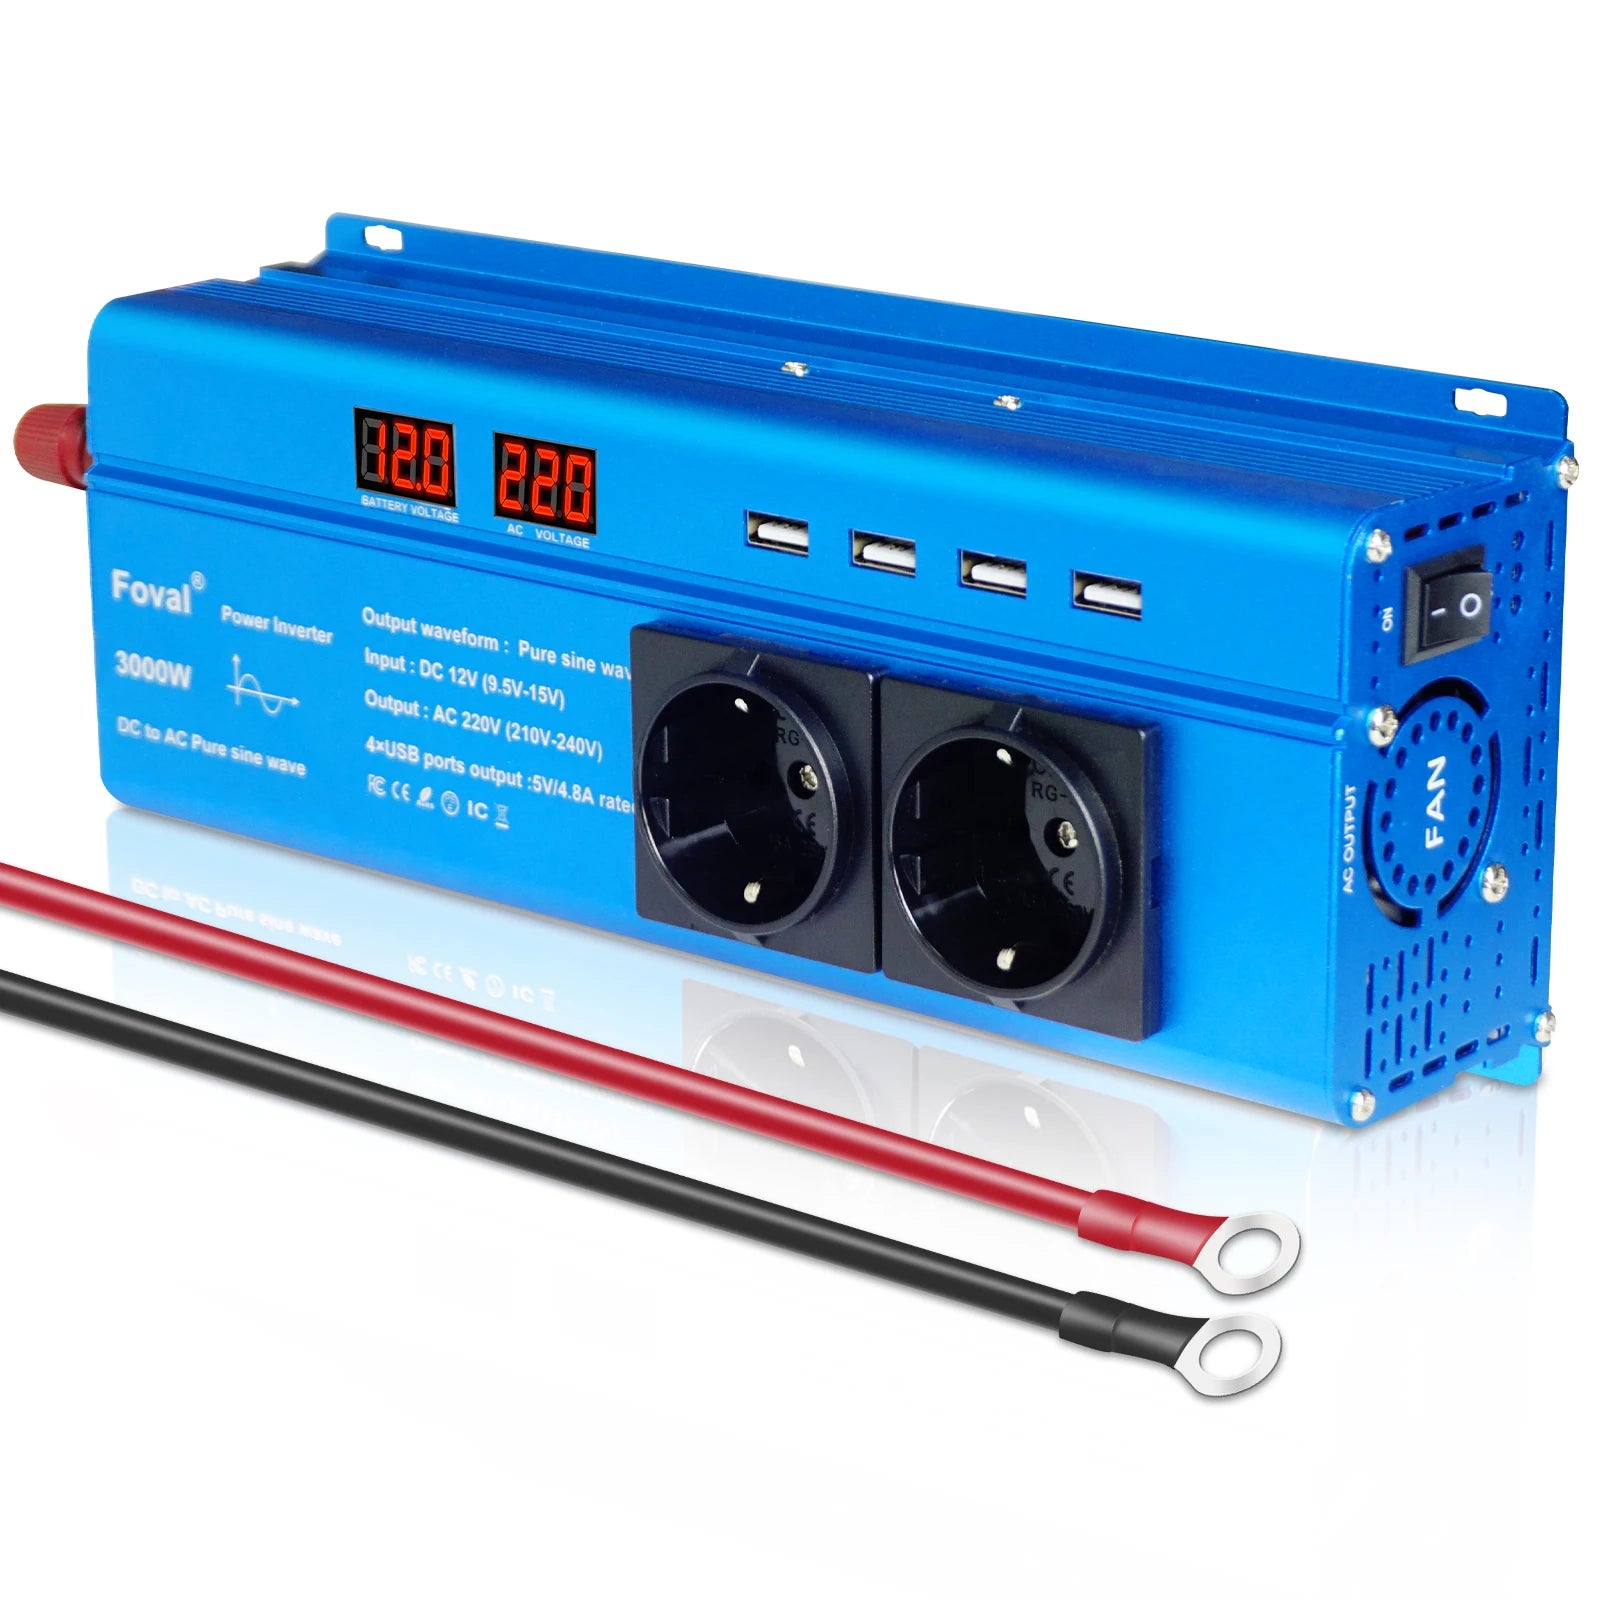 DC 12V to AC 220V Pure Sine Wave Inverter, Small contact surface on alligator clip cables not suitable for high-power equipment.